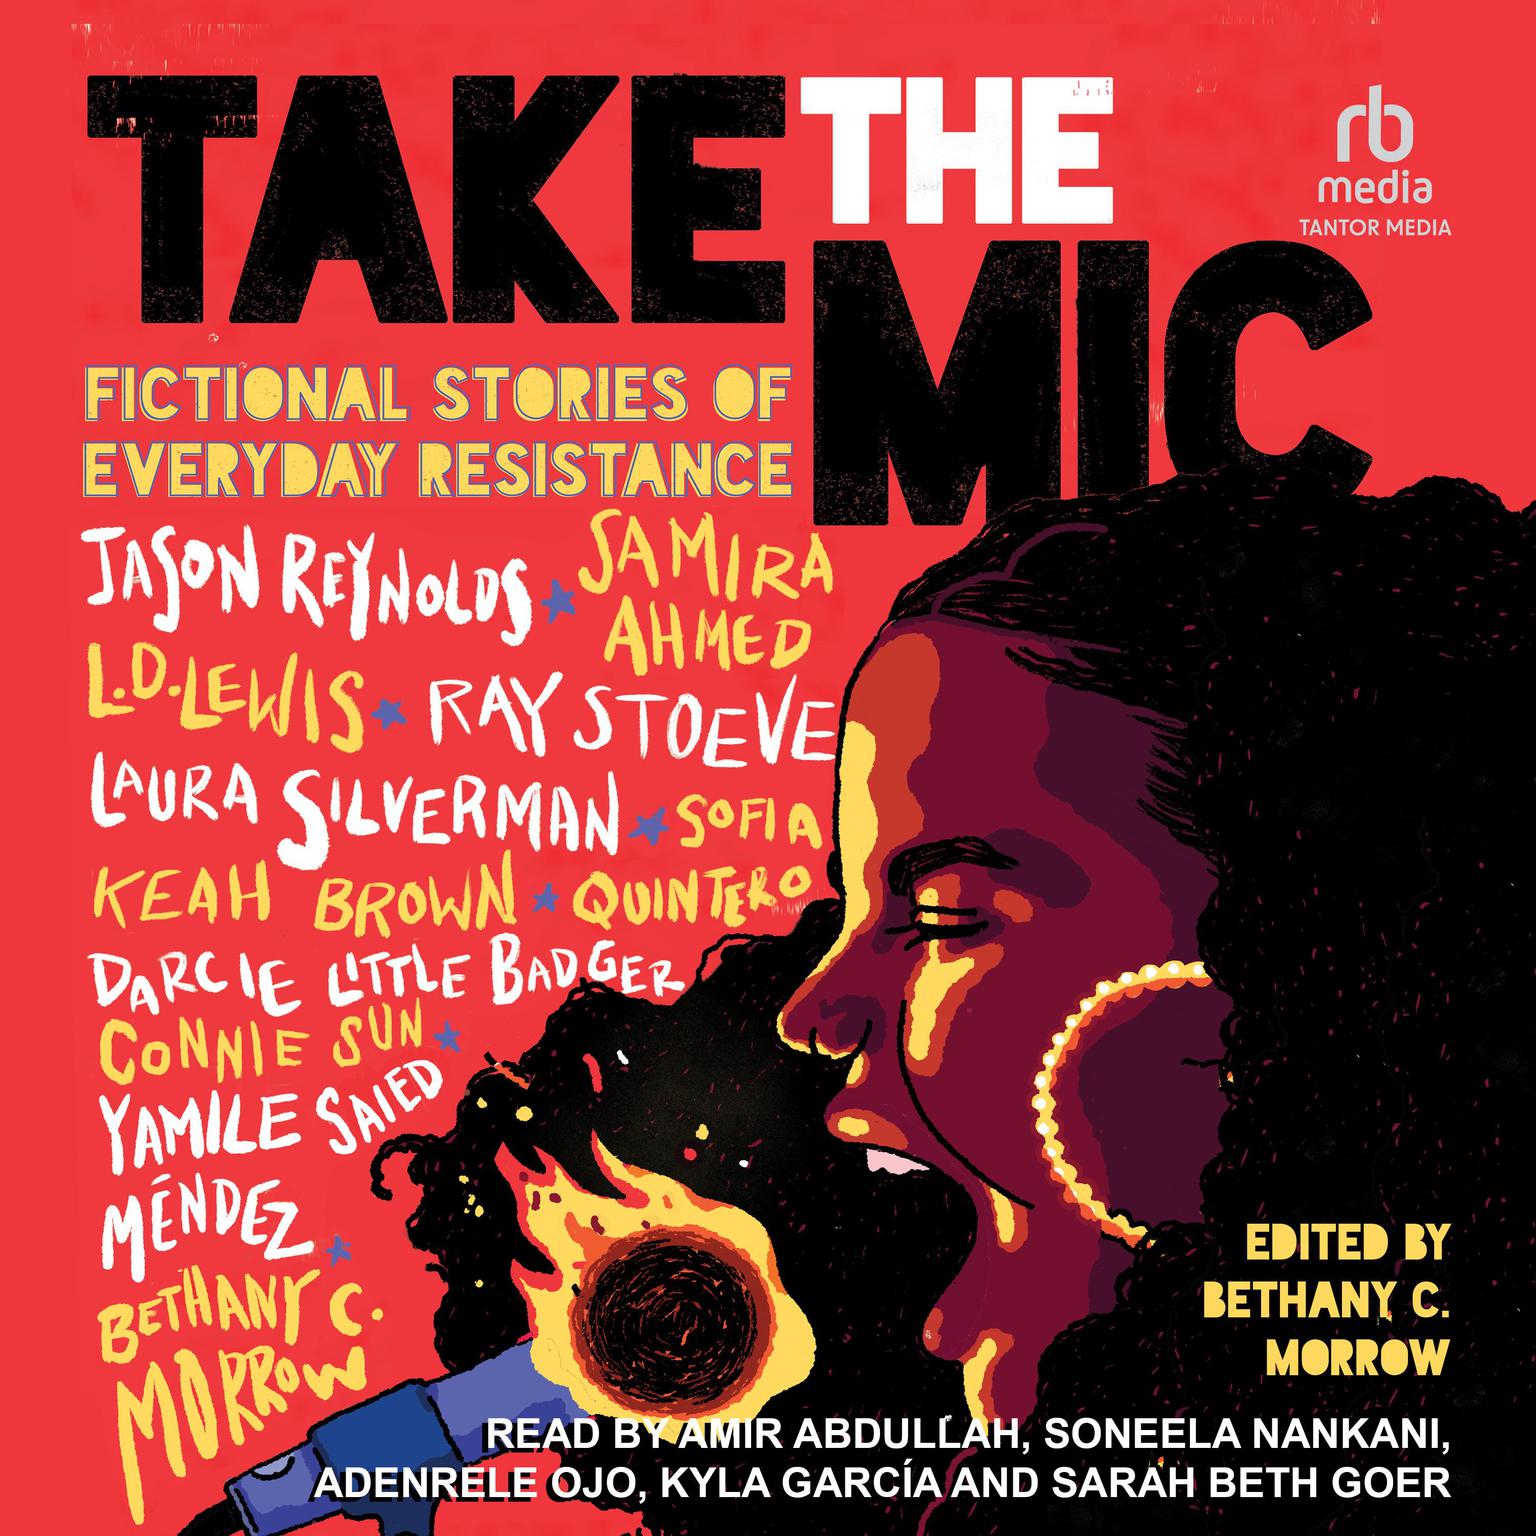 Take the Mic: Fictional Stories of Everyday Resistance Audiobook, by Jason Reynolds